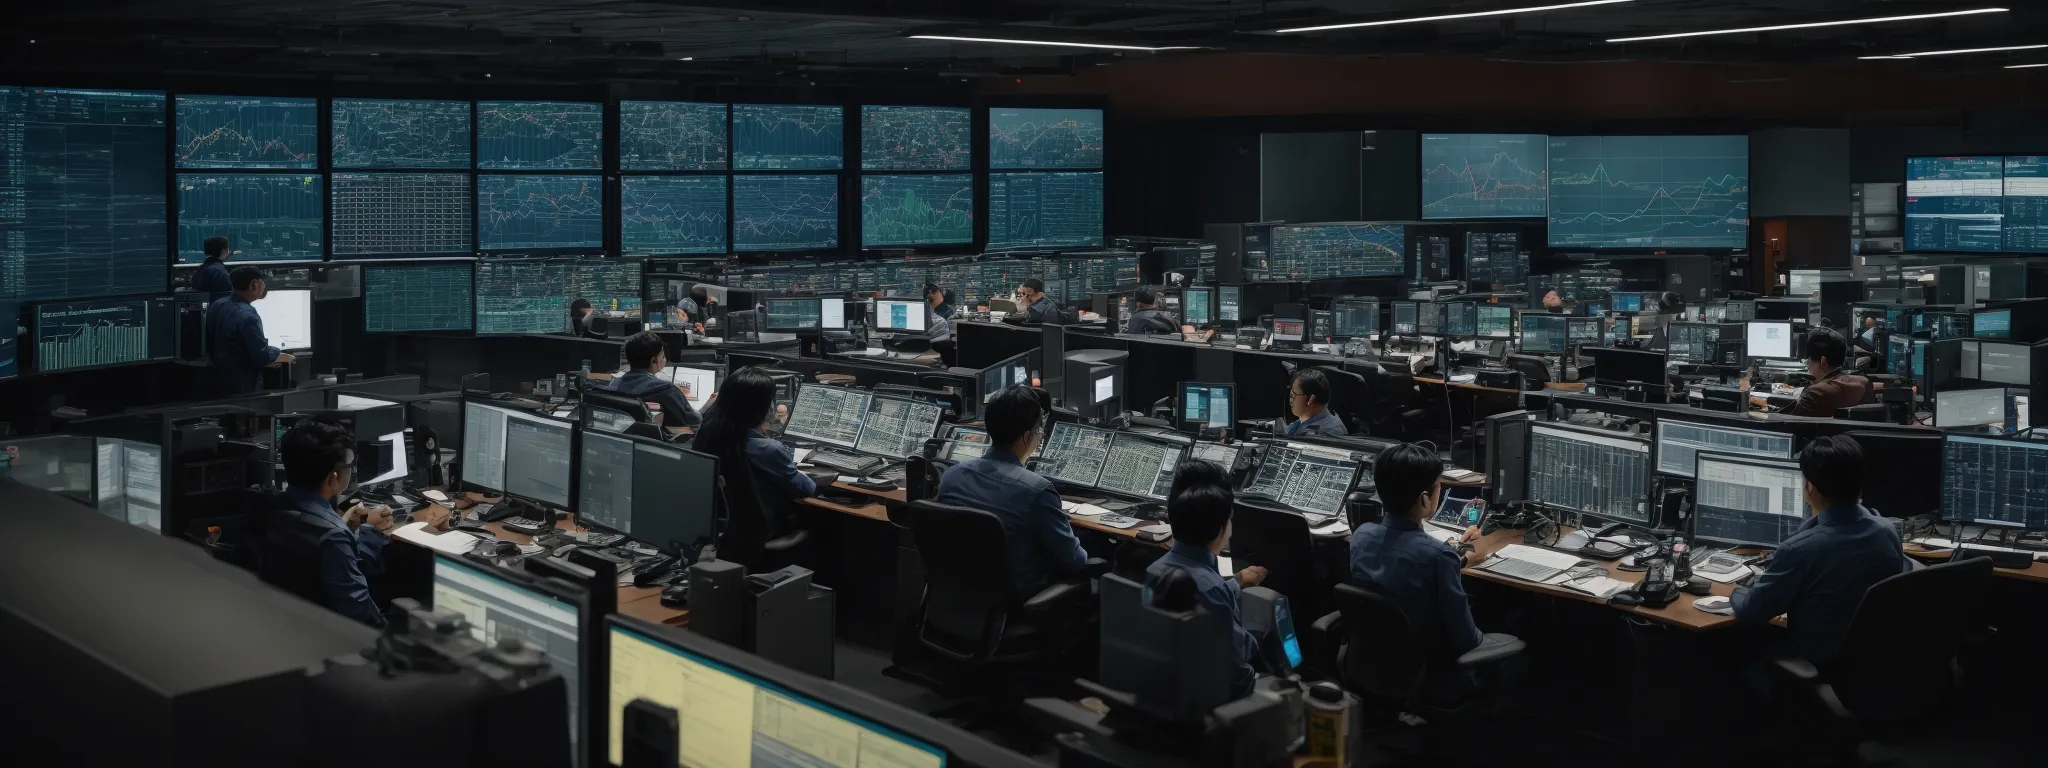 a busy control room with large screens displaying data analytics as operators monitor service delivery in real-time.